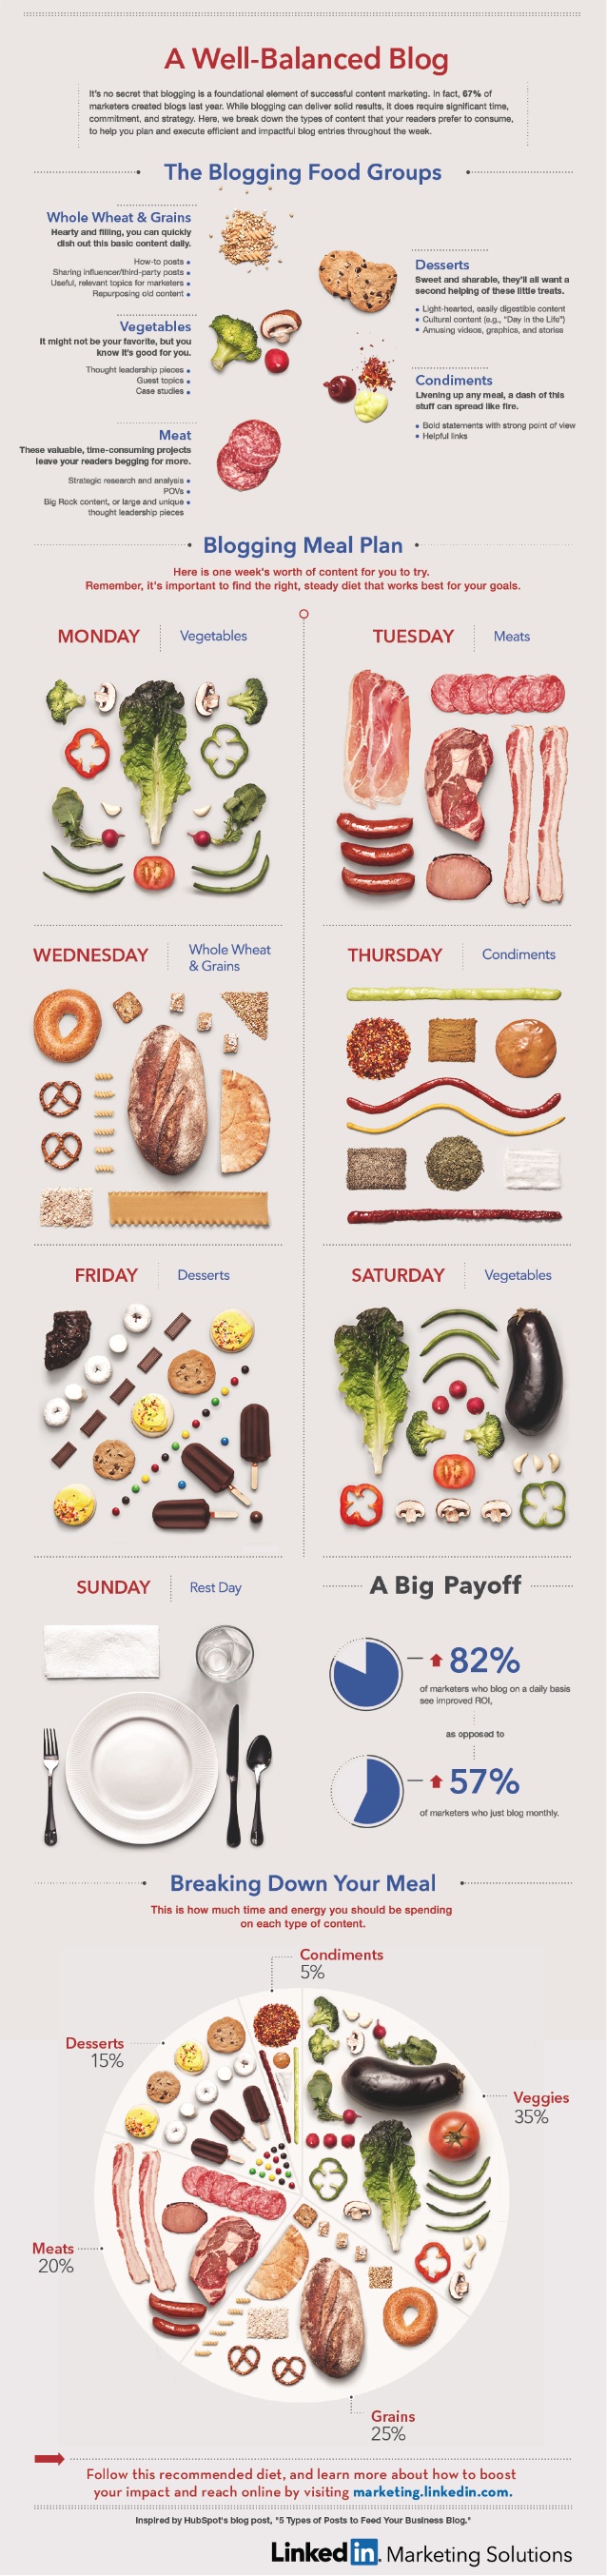 the-blogging-food-groups-a-wellbalanced-diet-of-content-infographic-1-638